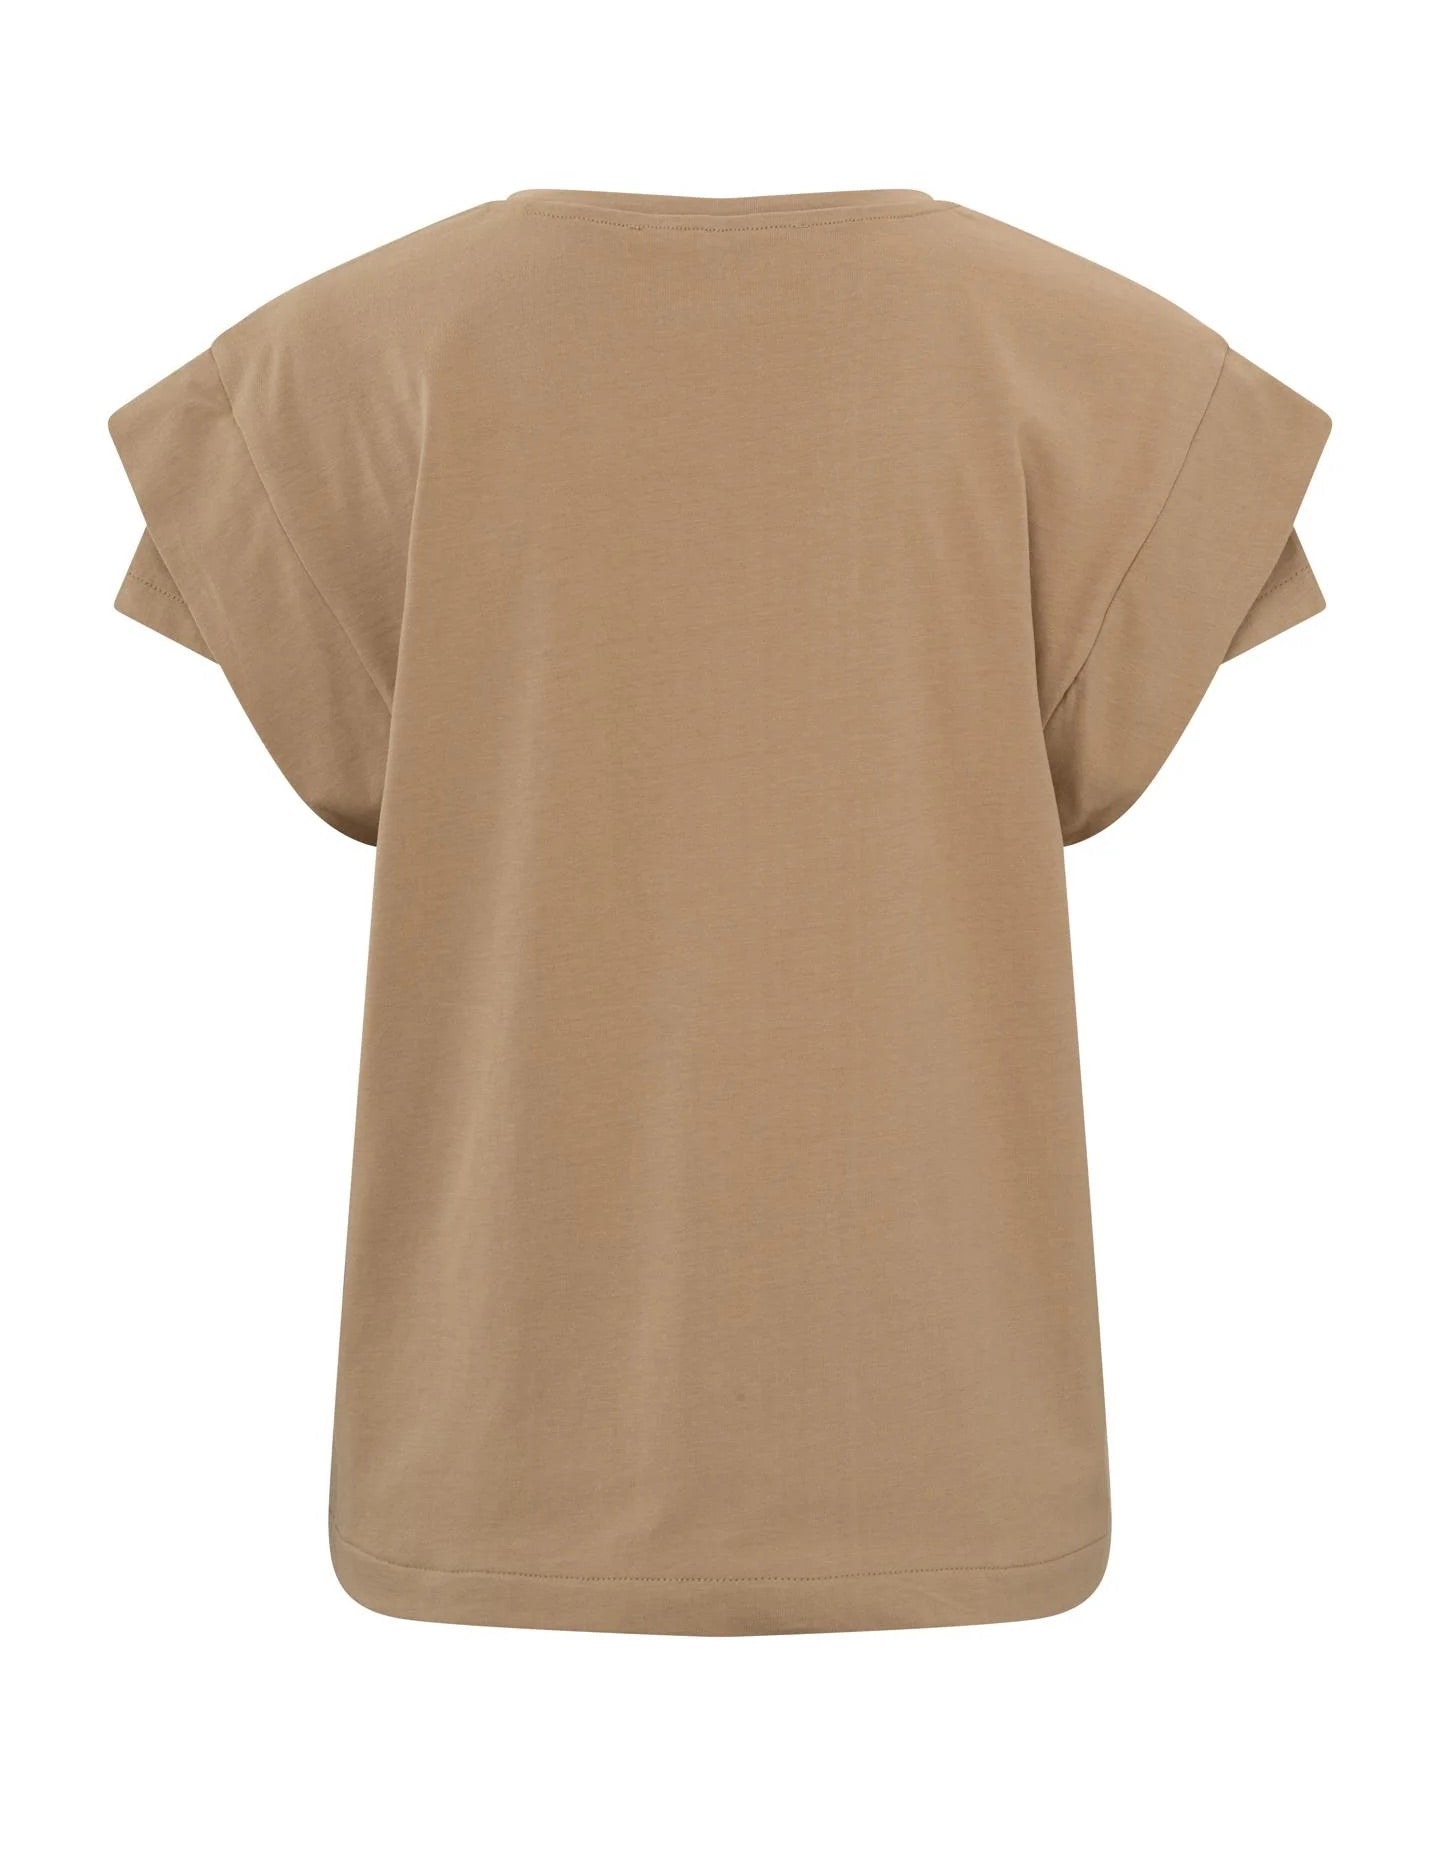 top-with-v-neck-and-double-short-sleeves-in-regular-fit-tannin-brown_8f1a74da-b796-4b38-8957-41c9aa4baf95_2880x_jpg.jpg